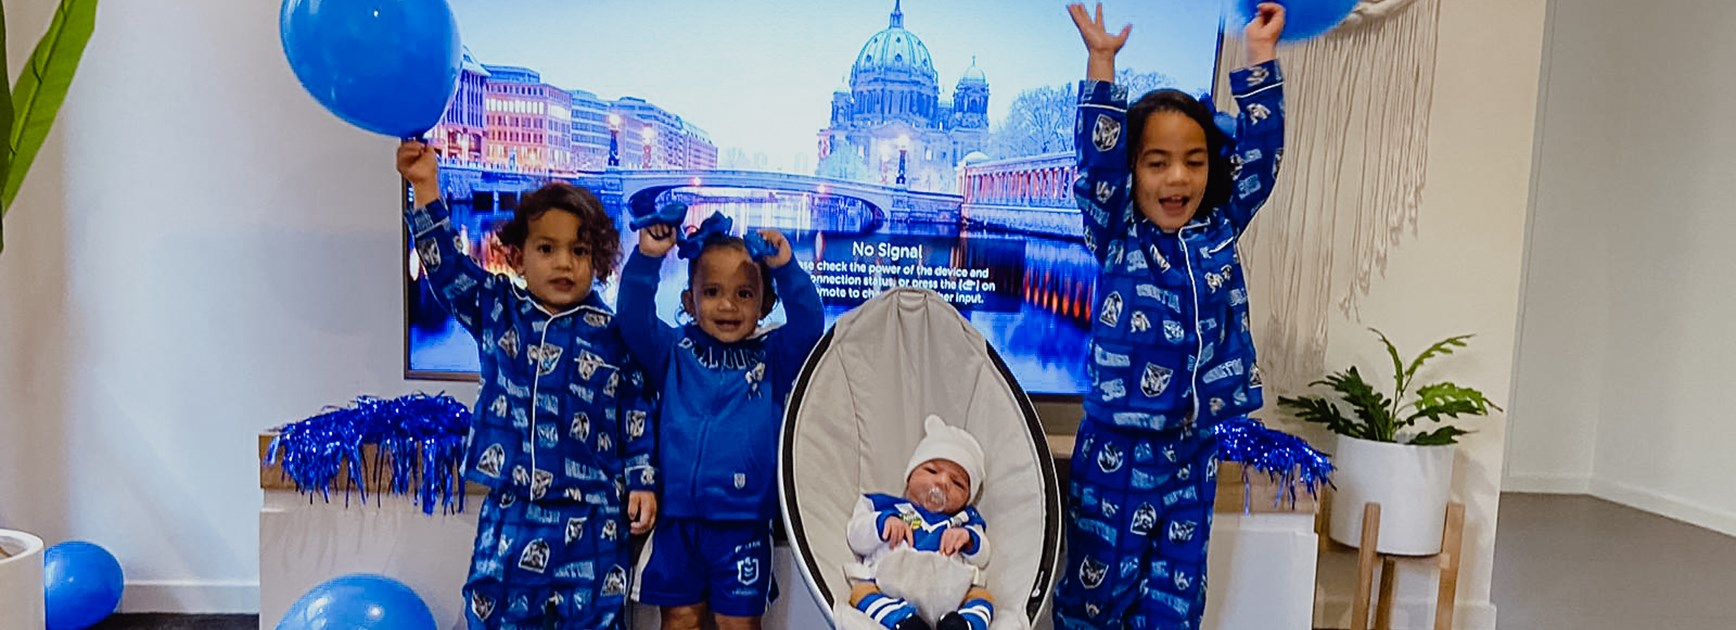 Families show they're #proudtobeabulldog